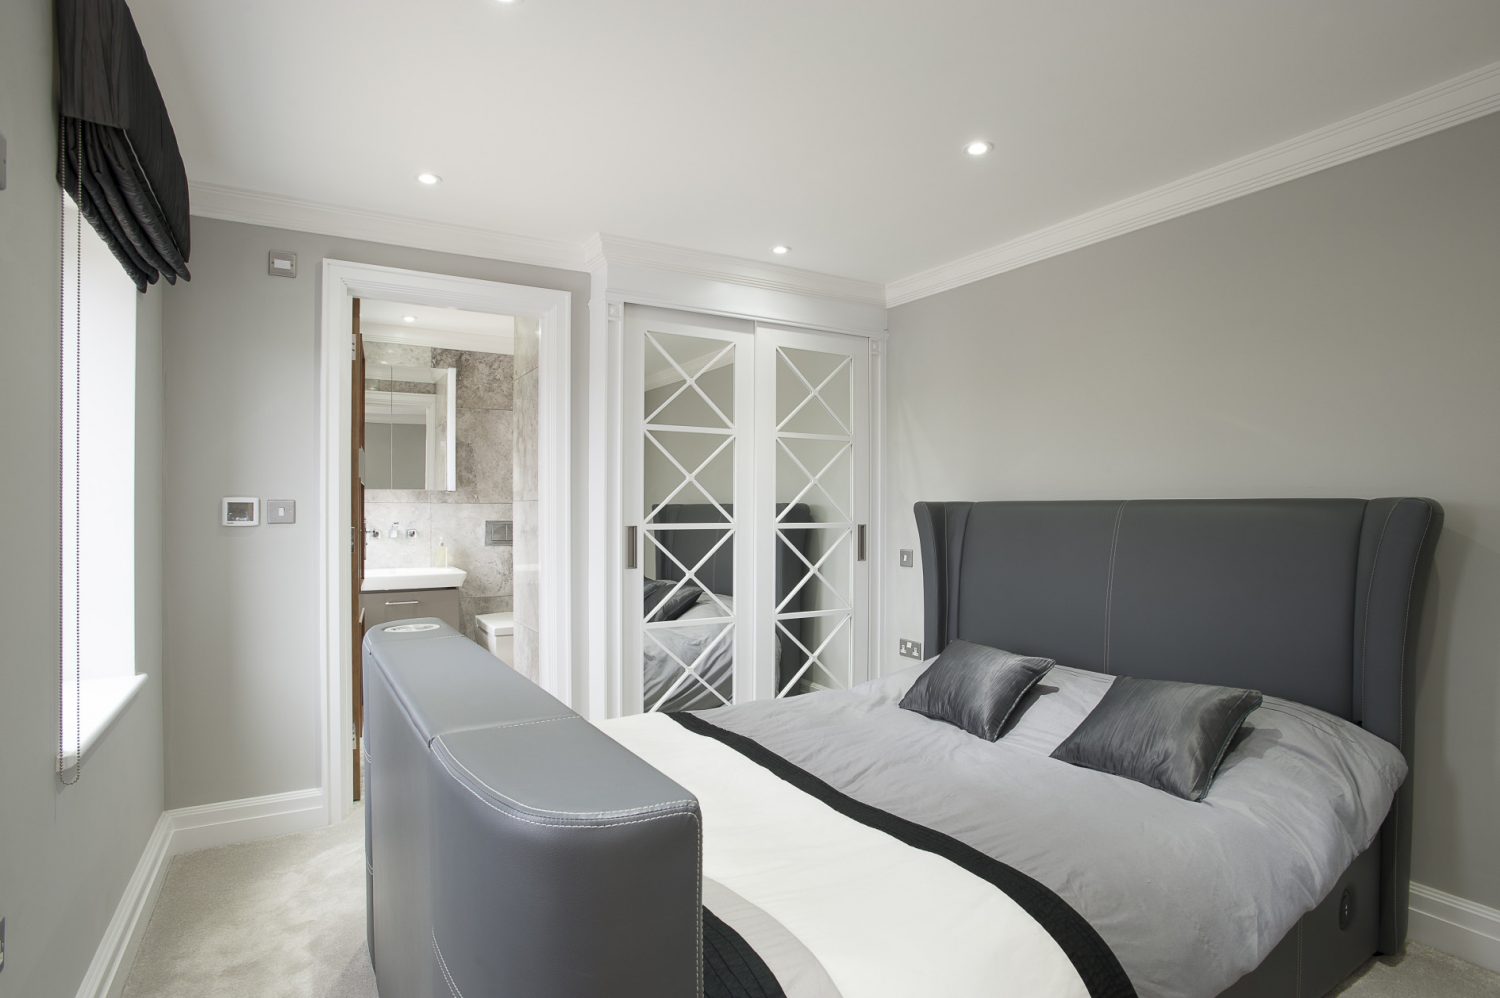 The two guest rooms feature grey leather beds from the feet of which rise flat screen TVs